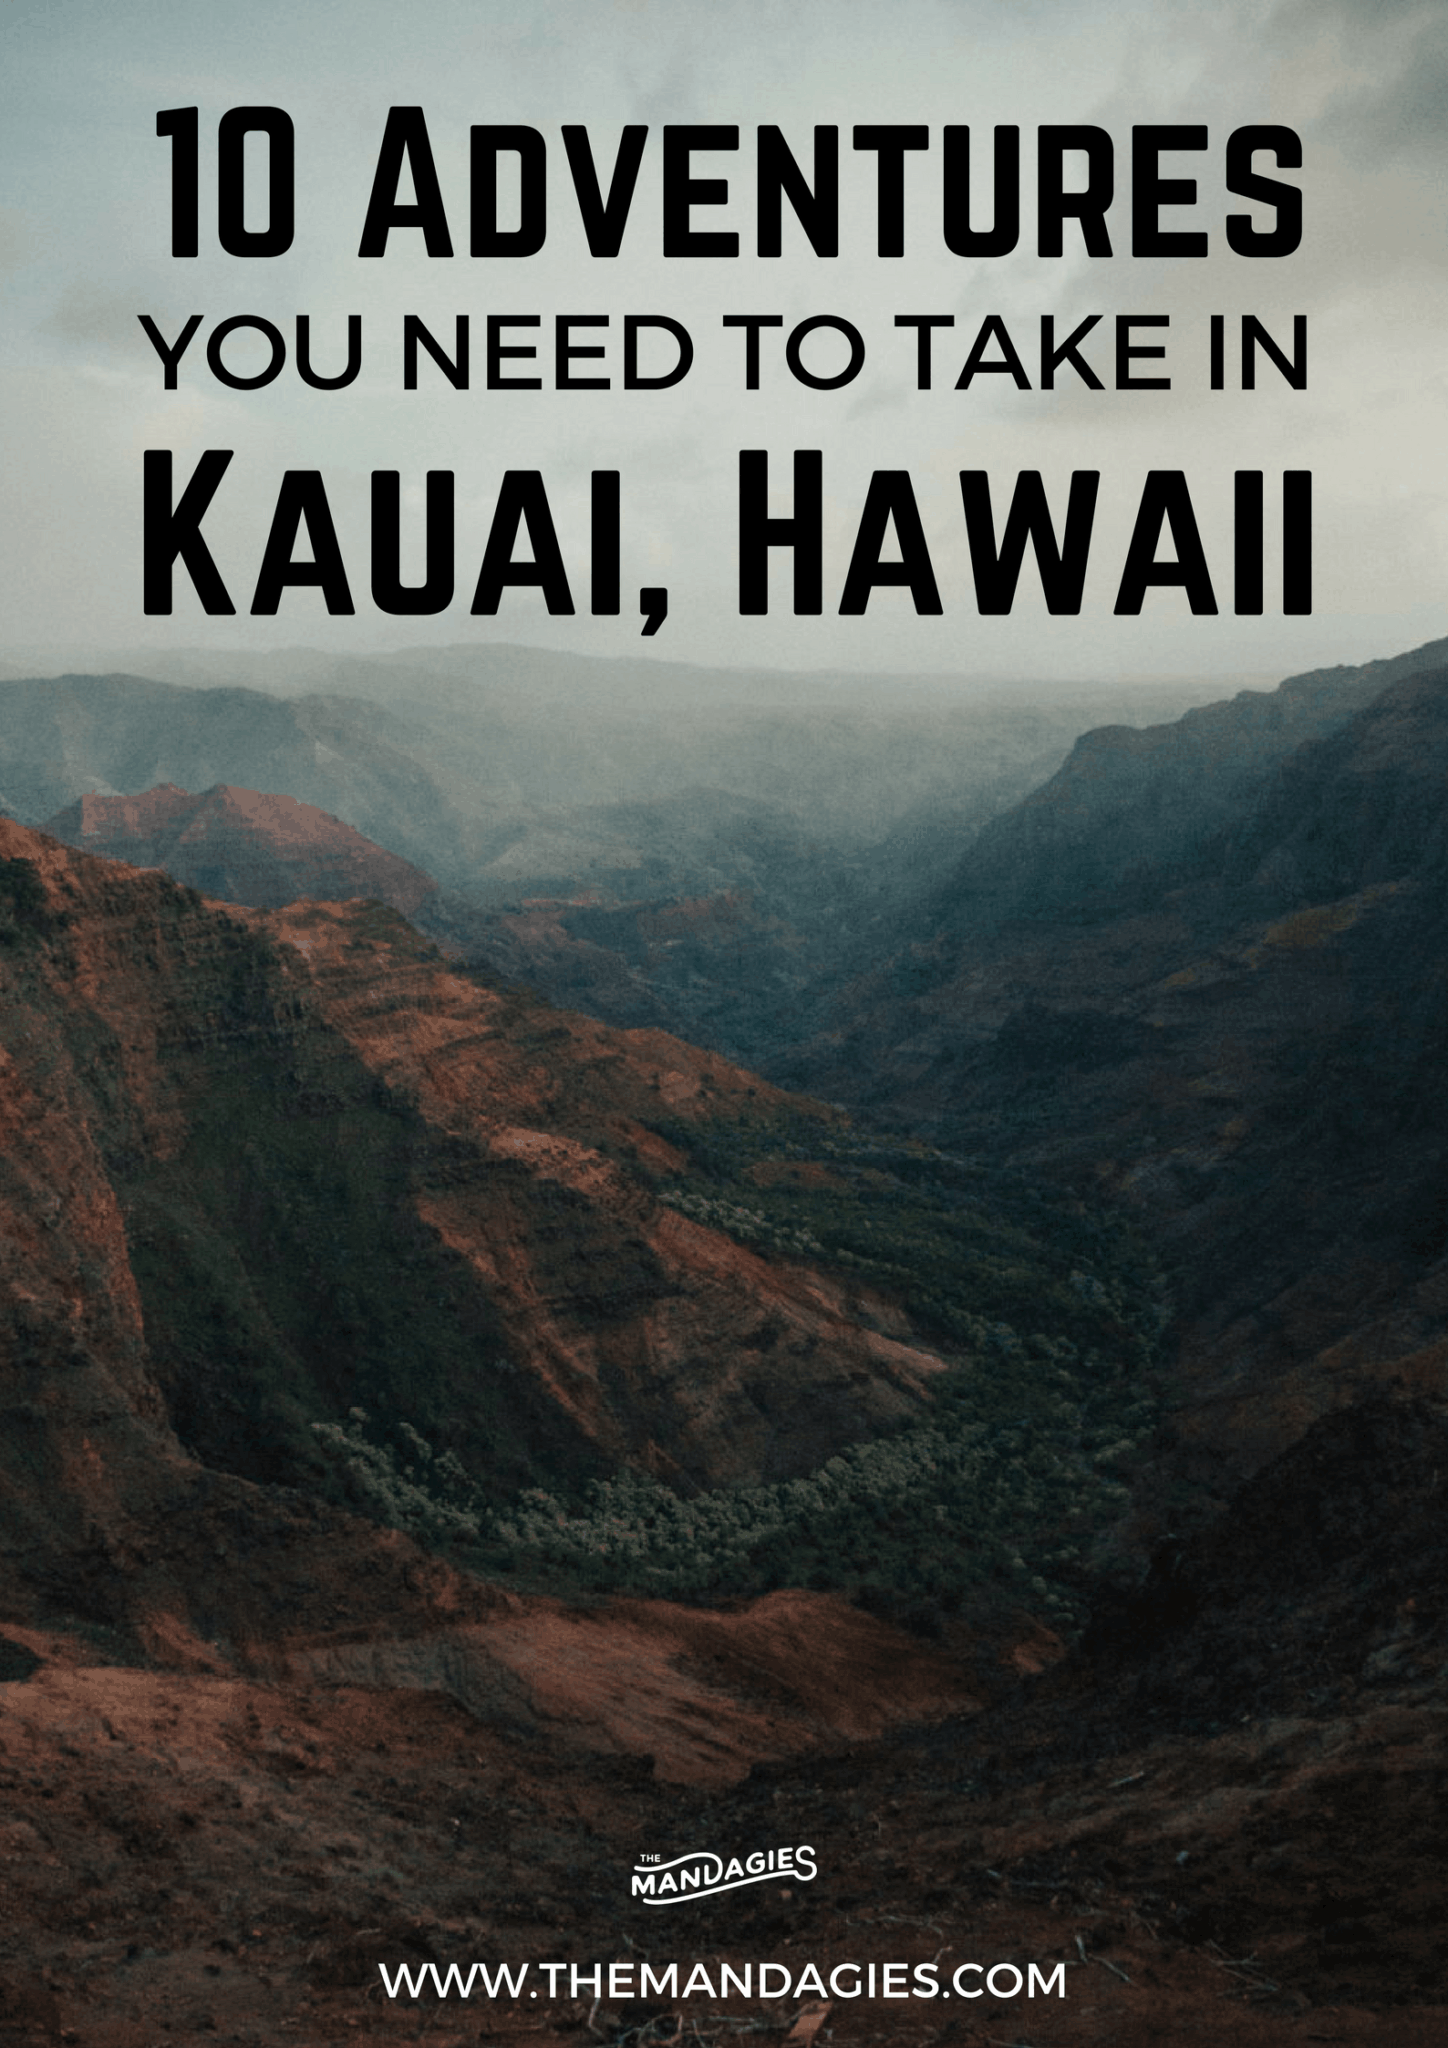 In this post, we're sharing our favorite things to do in Kauai – all inclusive with gorgeous beaches, stunning vistas, and breathtaking waterfalls! This post has everything you need to have the adventure of a lifetime in Hawaii! #kauai #hawaii #kapaa #beach #surf #summer